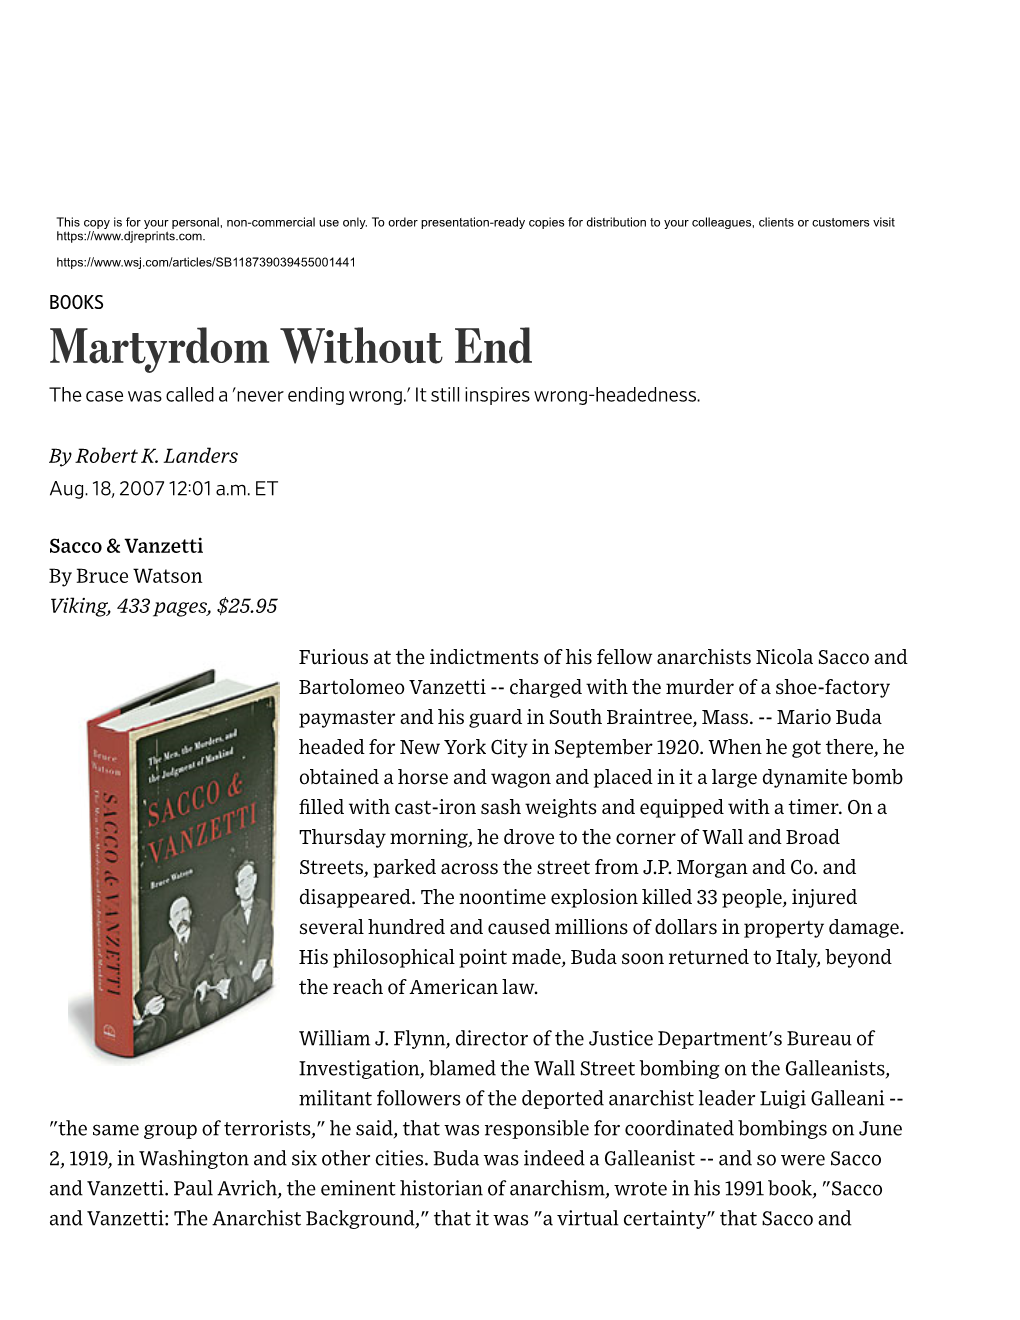 Martyrdom Without End the Case Was Called a 'Never Ending Wrong.' It Still Inspires Wrong-Headedness